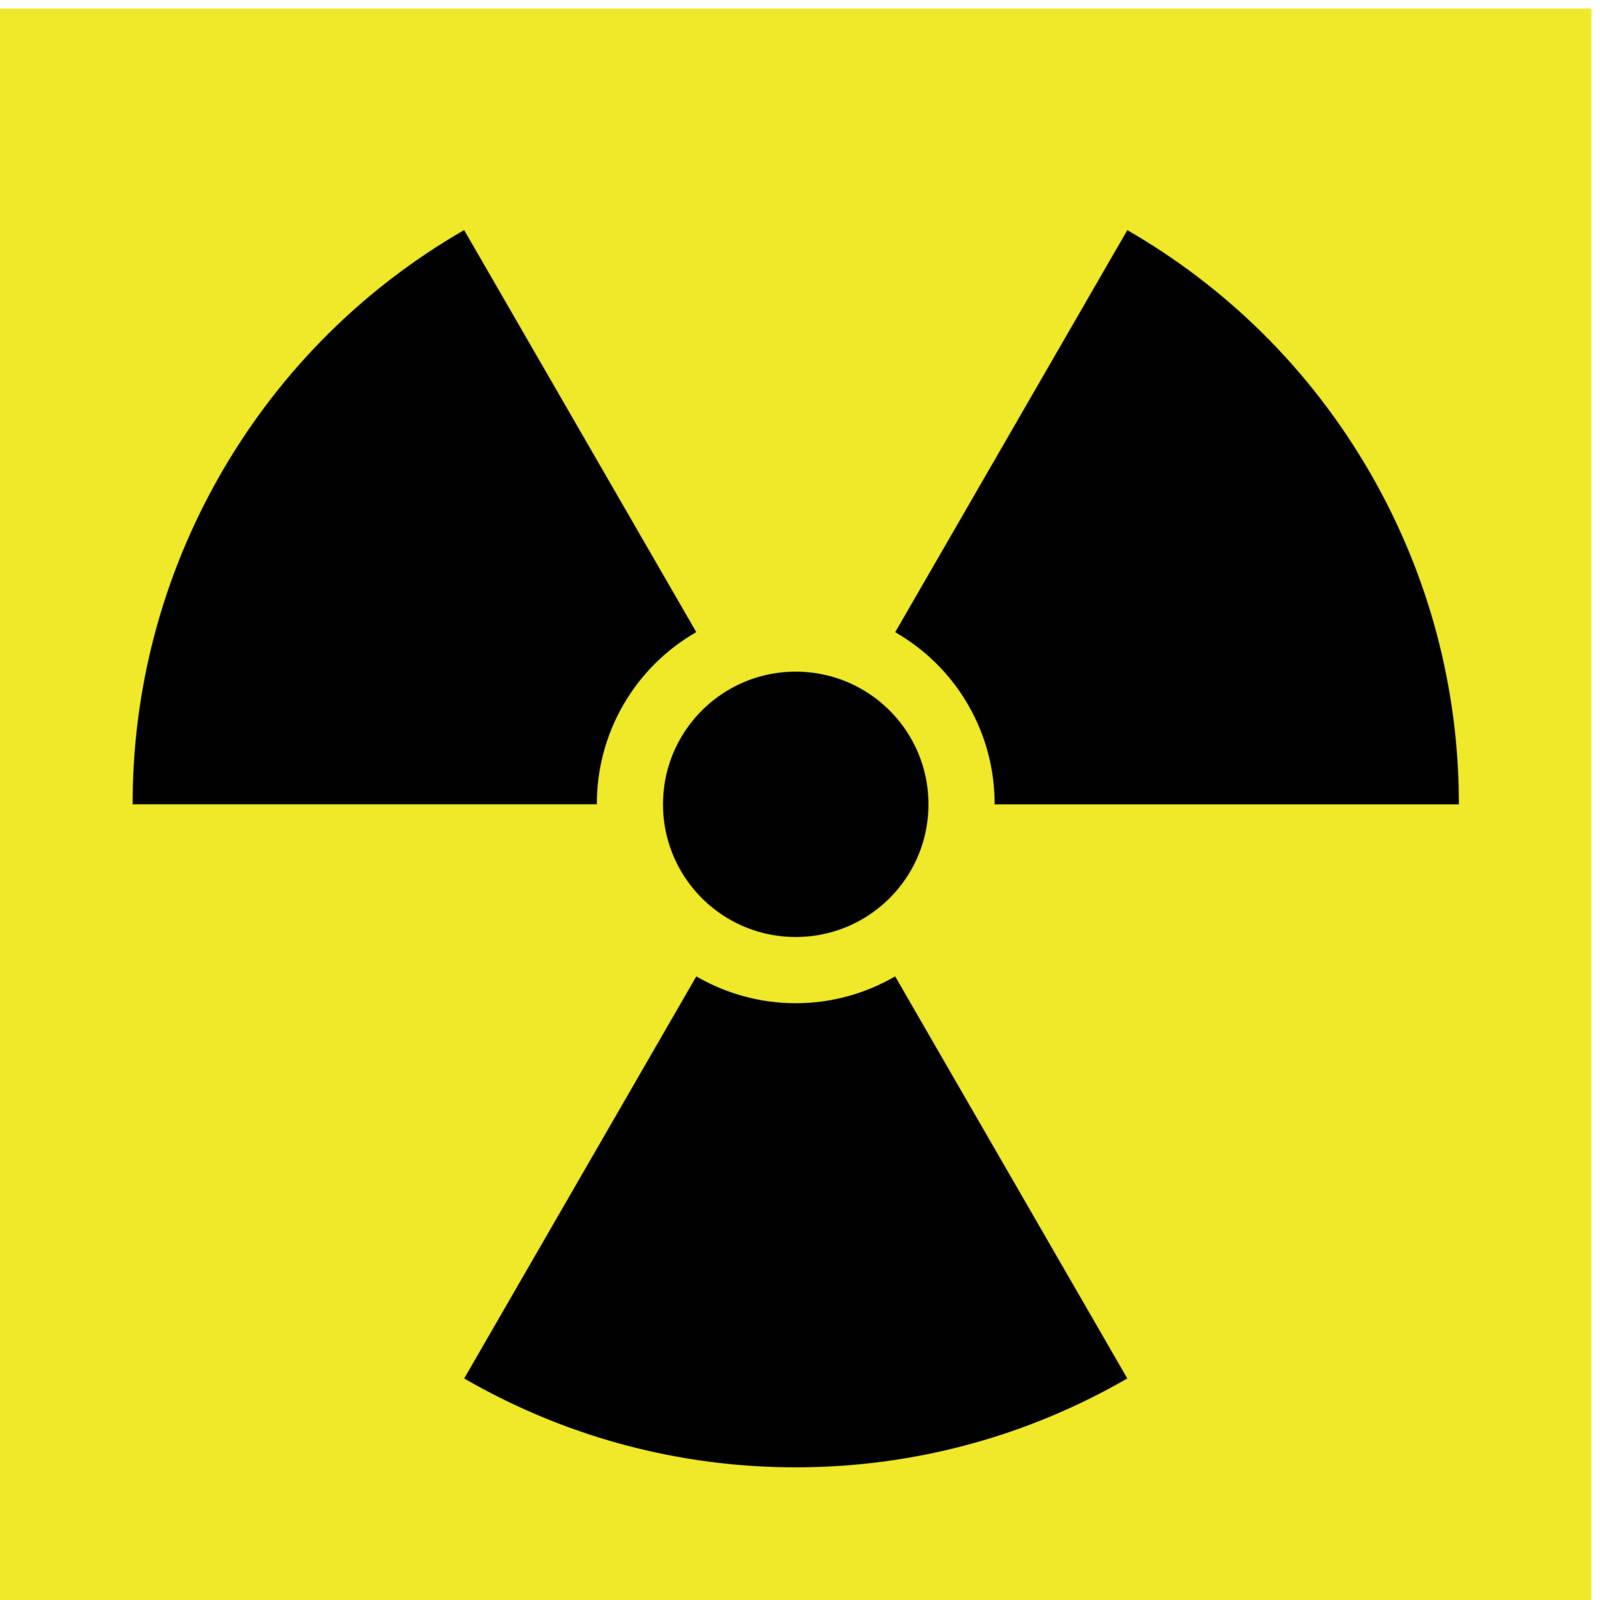 An abstract vector illustration of a radiation sign.